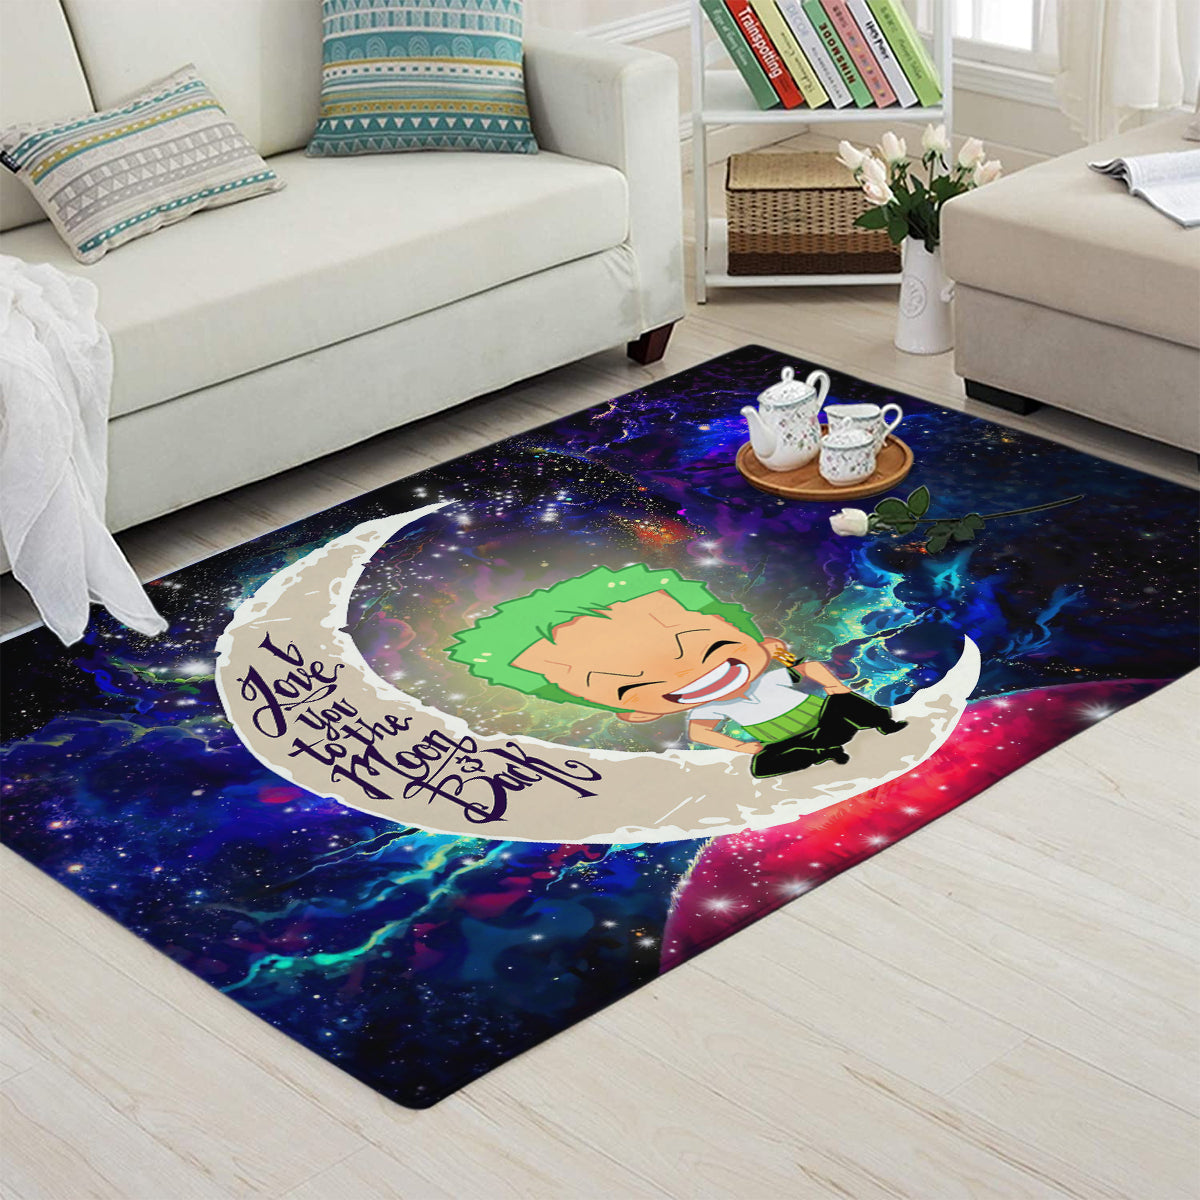 Zoro One Piece Love You To The Moon Galaxy Carpet Rug Home Room Decor